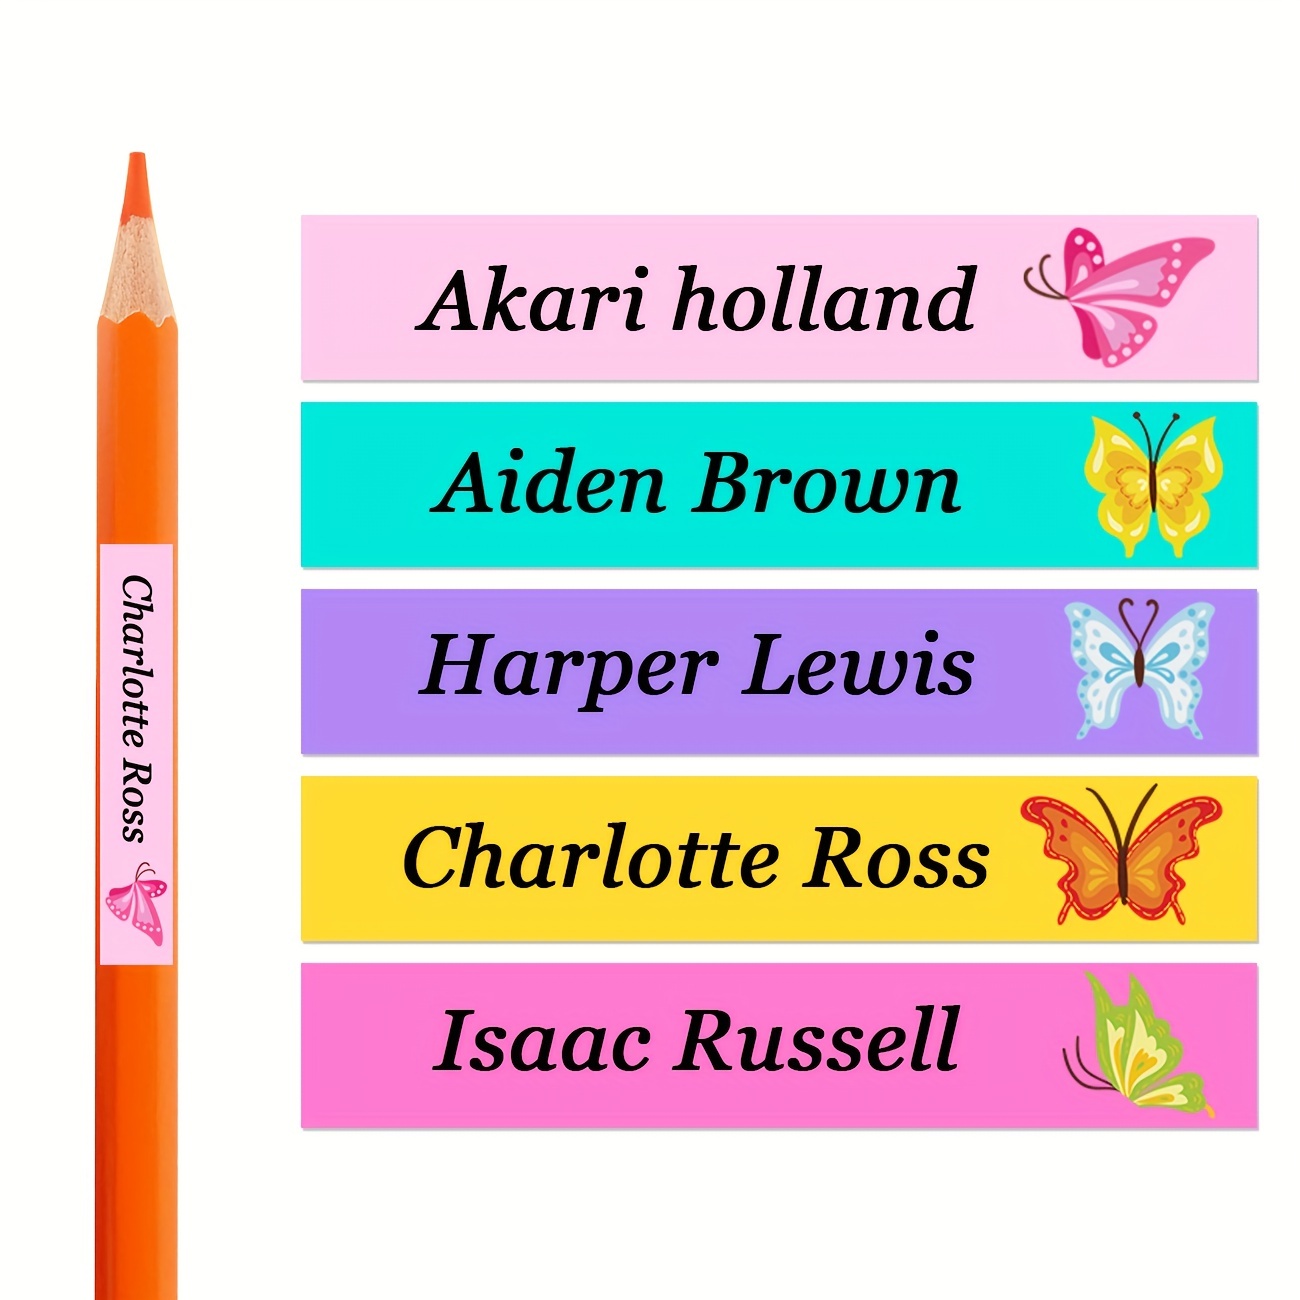 

[customized] 180 Personalized Waterproof Labels, Customized Name Labels For School Supplies, Lunch Boxes, Books, Pencils, Water Bottles, Toothbrush Stickers, 2 Inches X 0.31 Inches